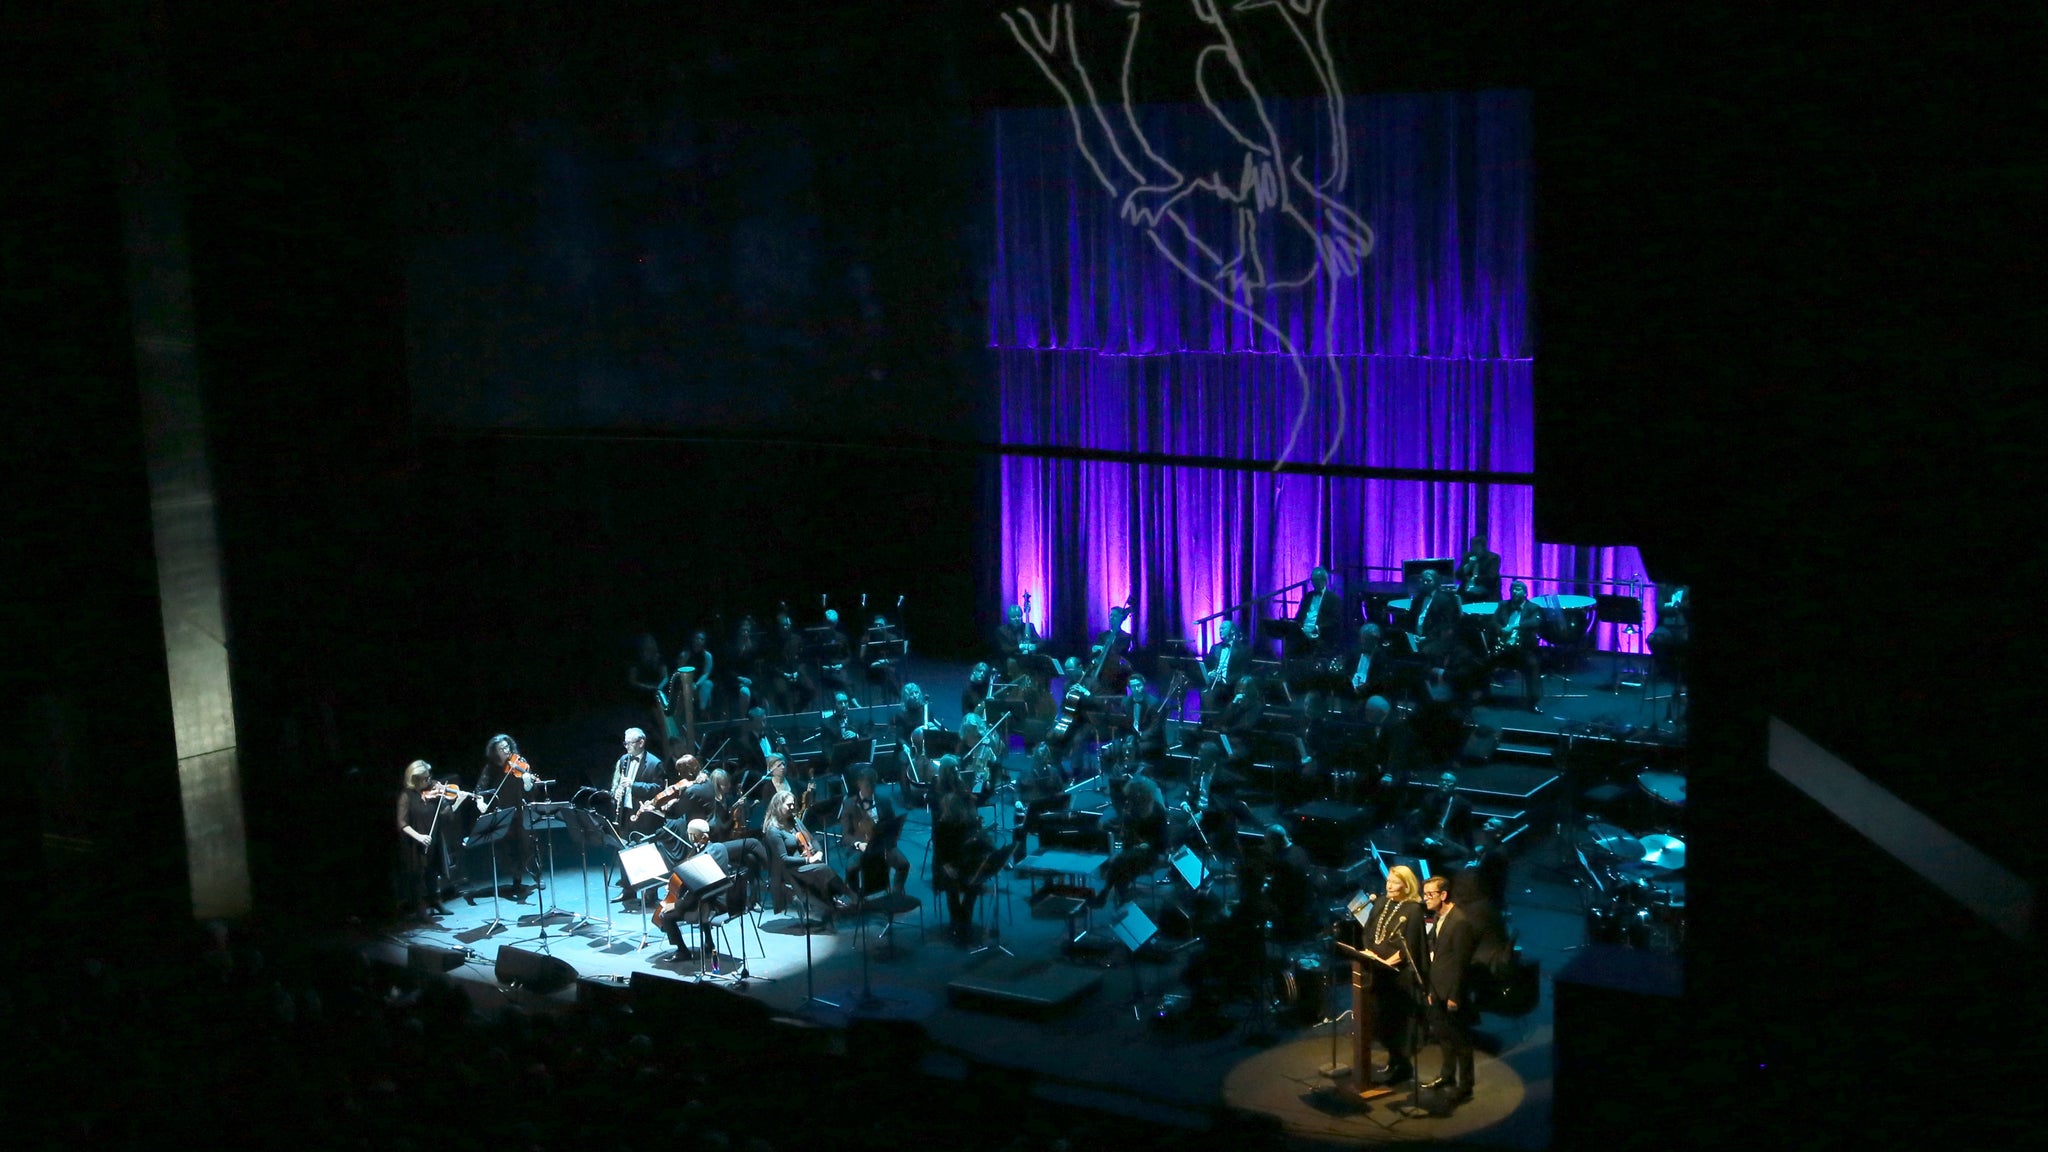 The Rte Orchestra Perform the Songs of Leonard Cohen